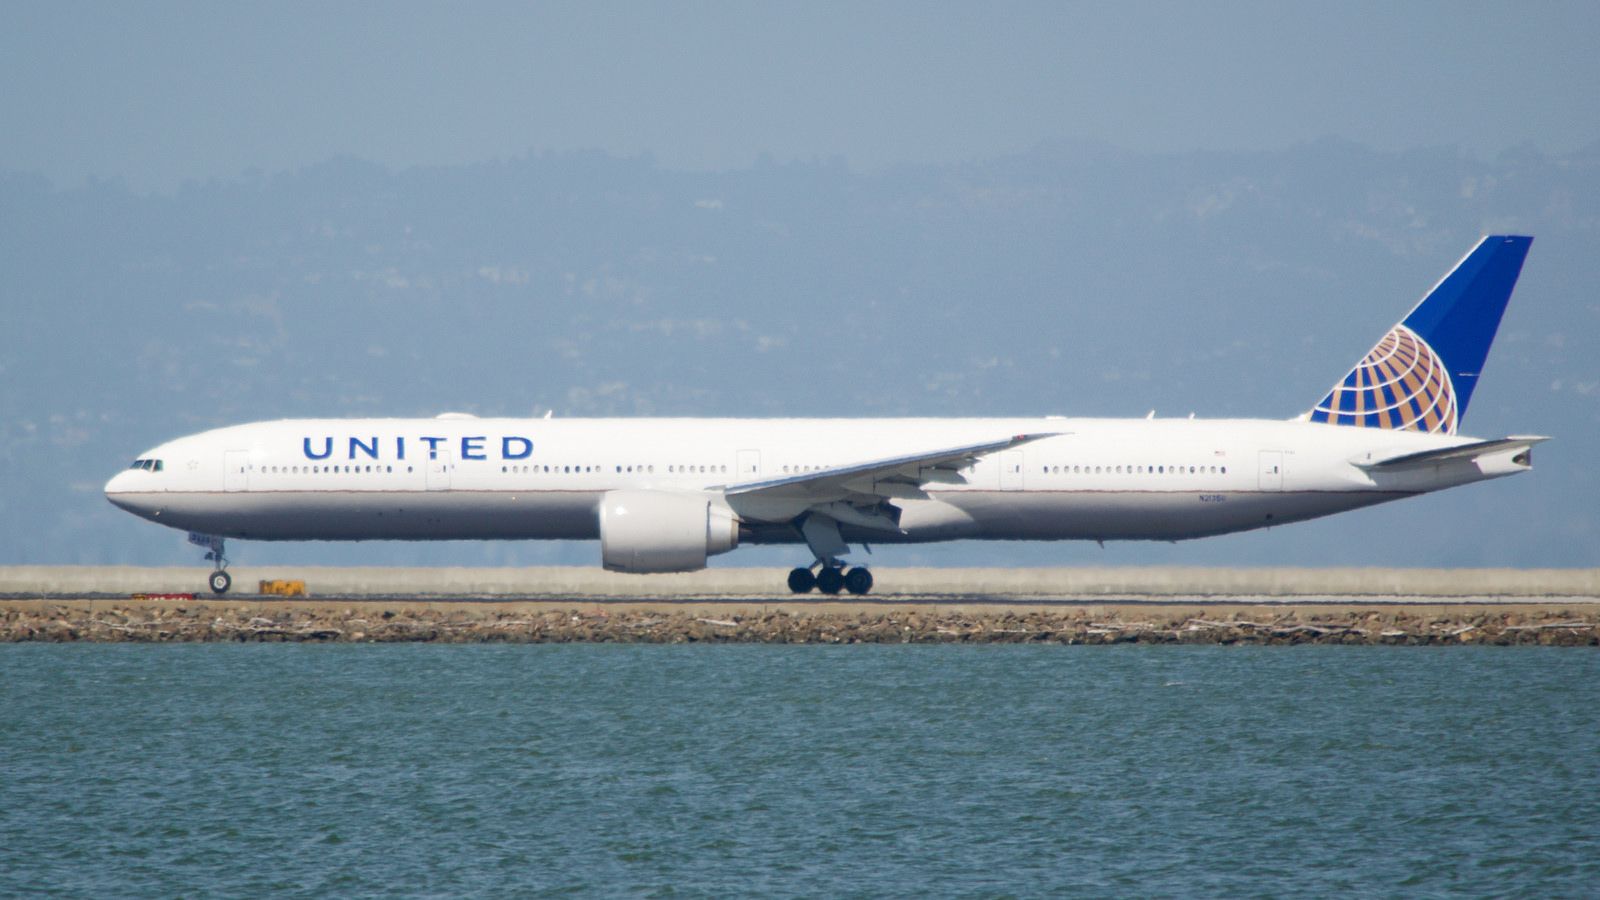 It's About To Cost $300 Less To Fly SFO TLV On United